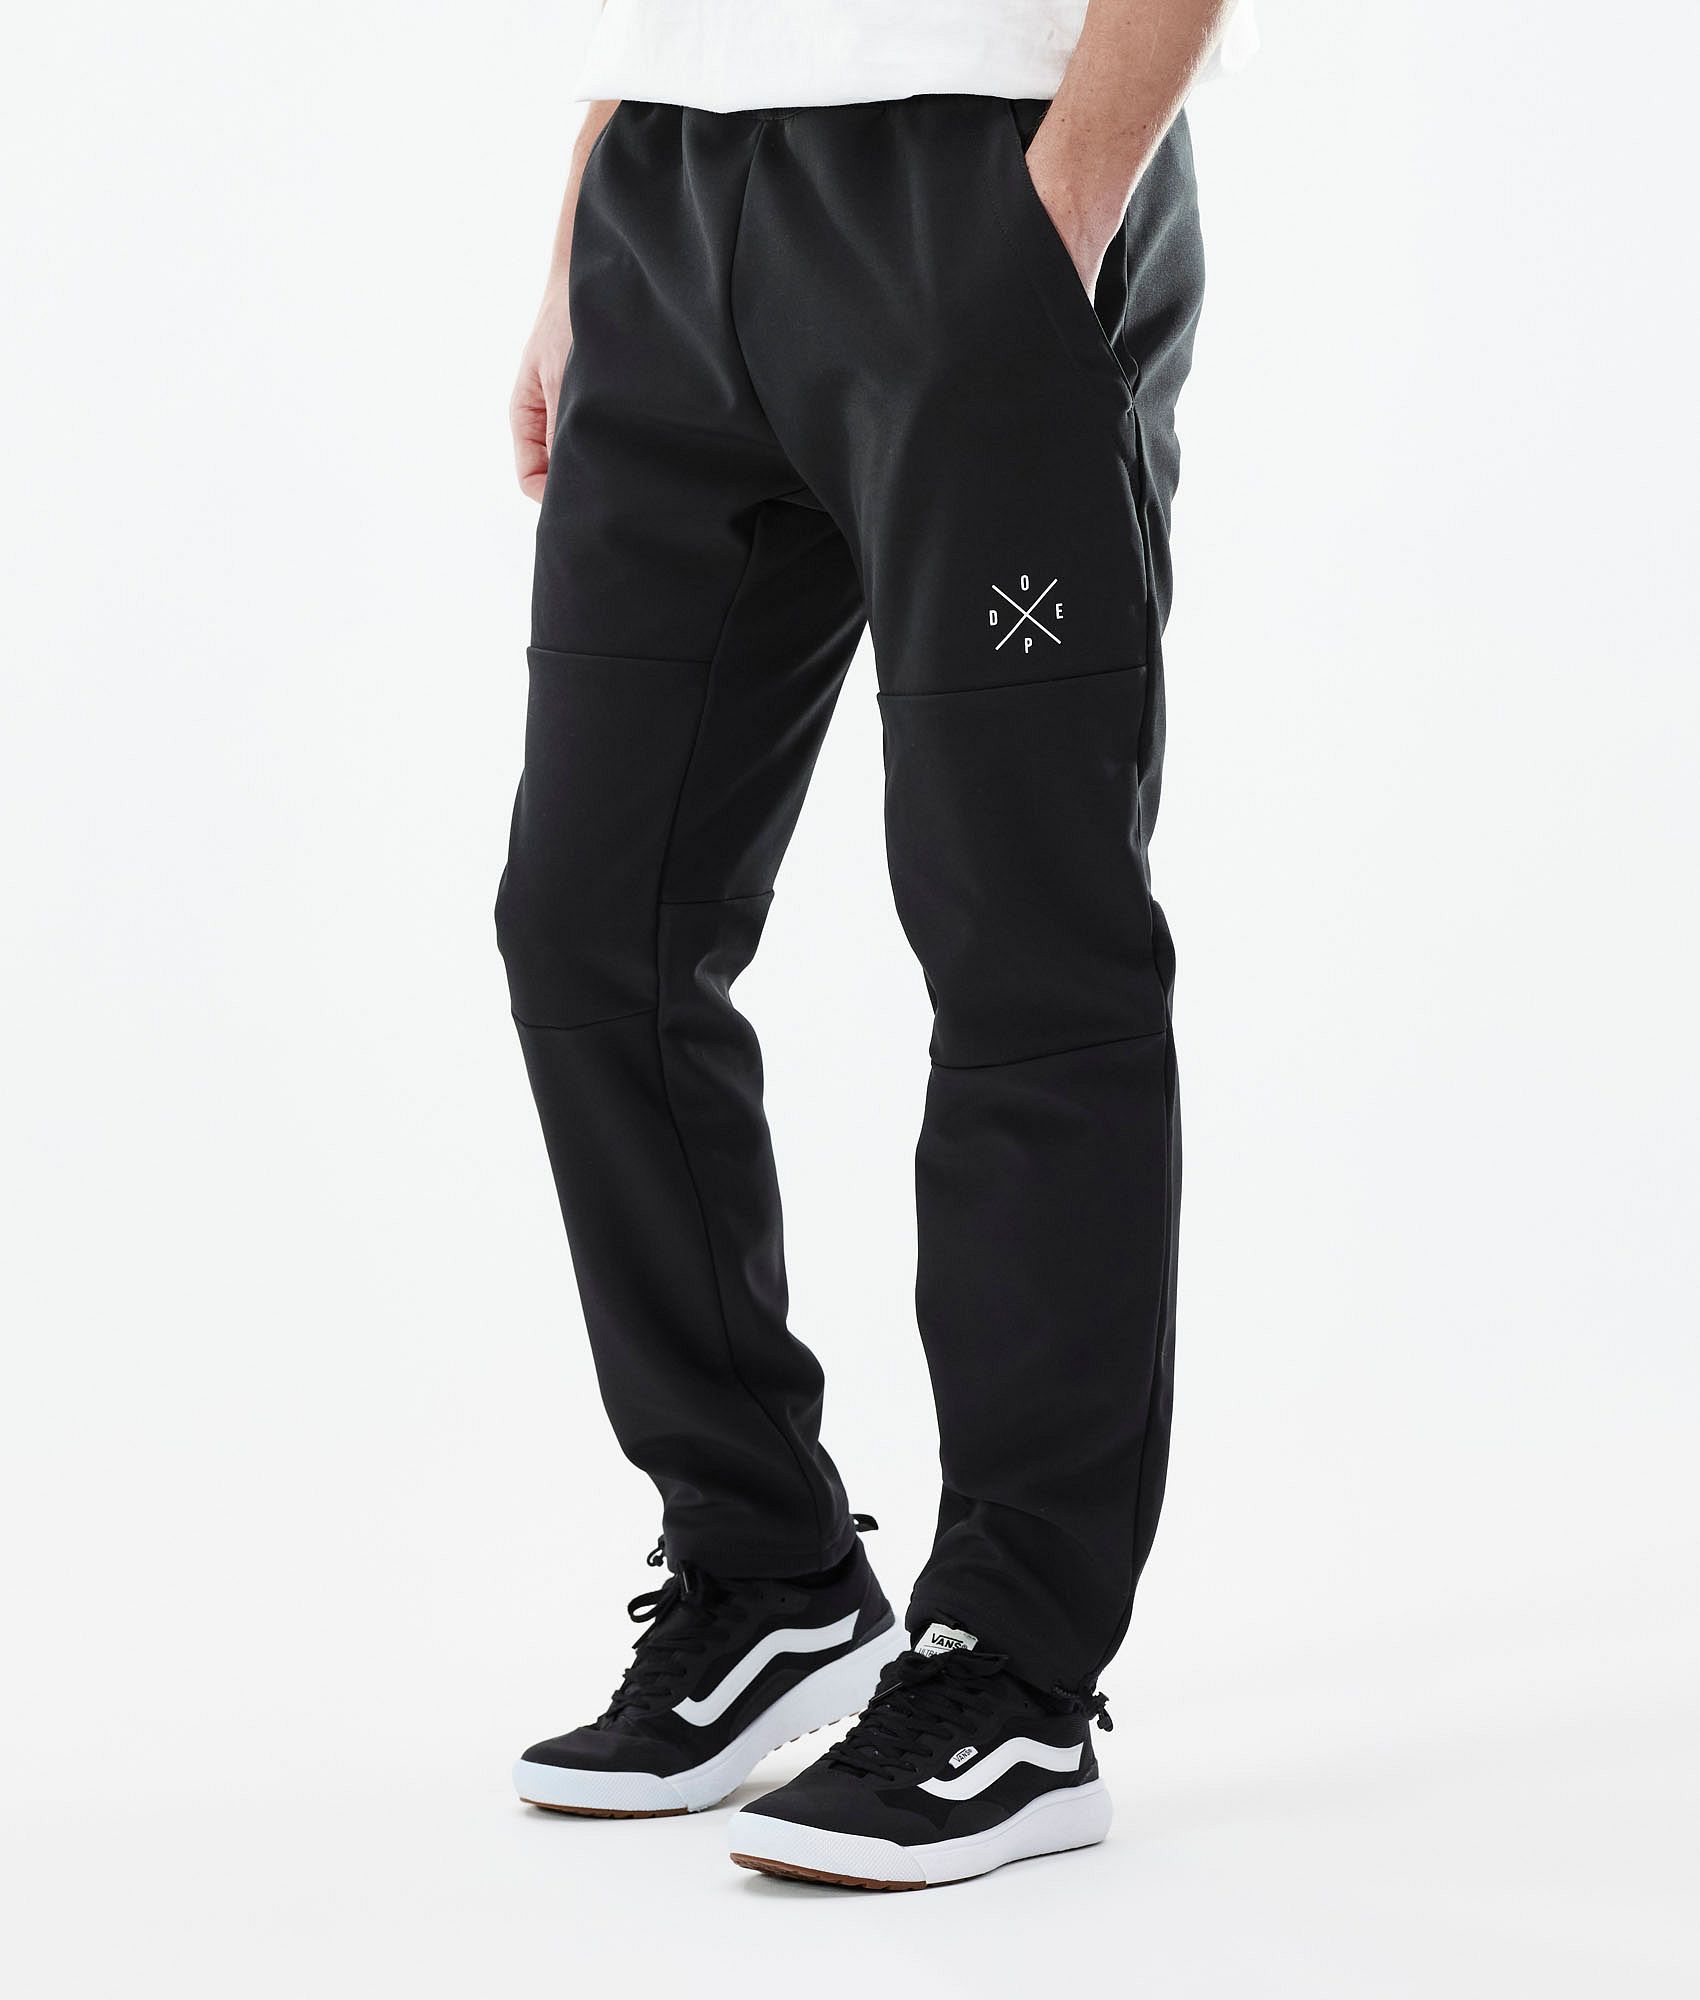 Aggregate more than 152 dope sport track pants